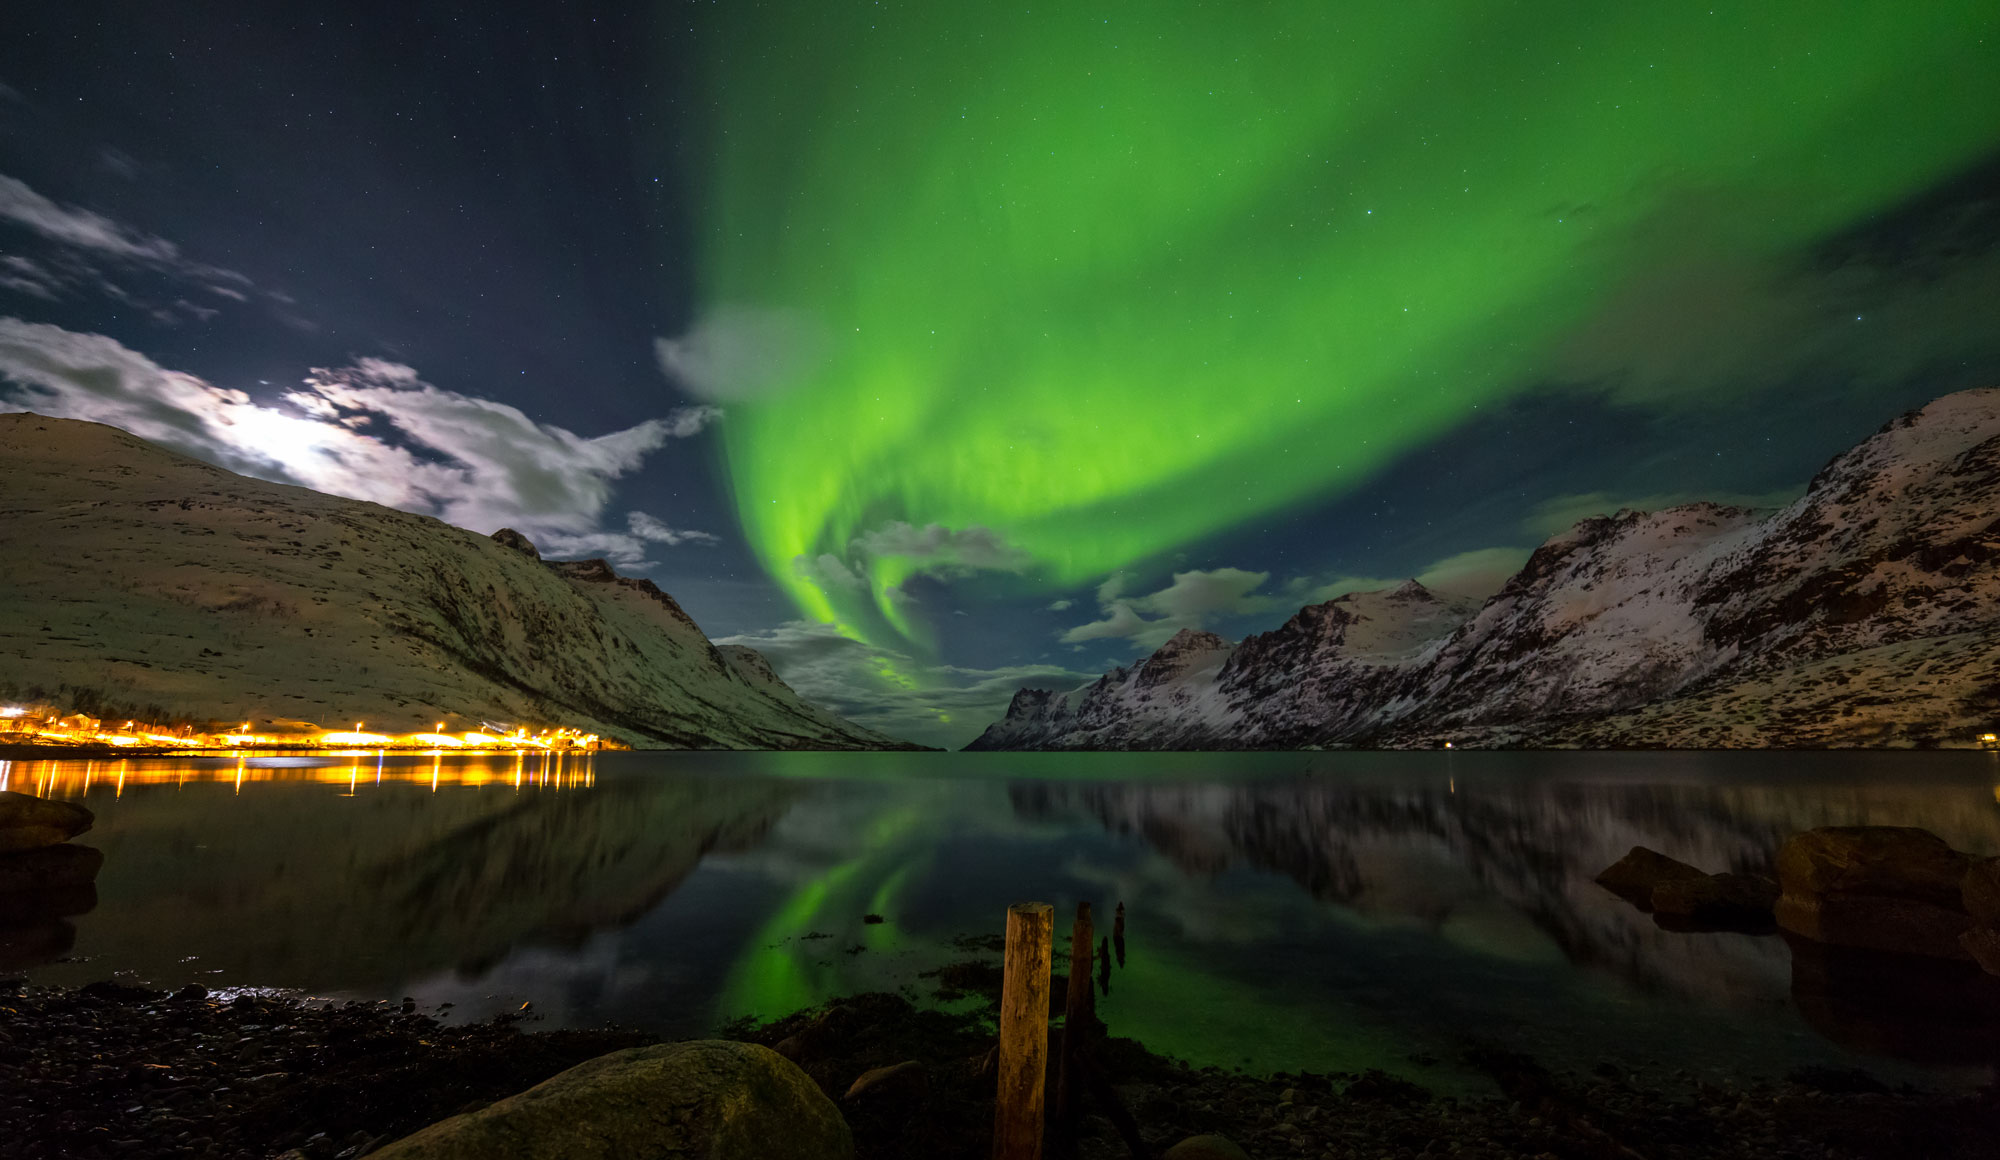 Why Norway may be your kind of study abroad